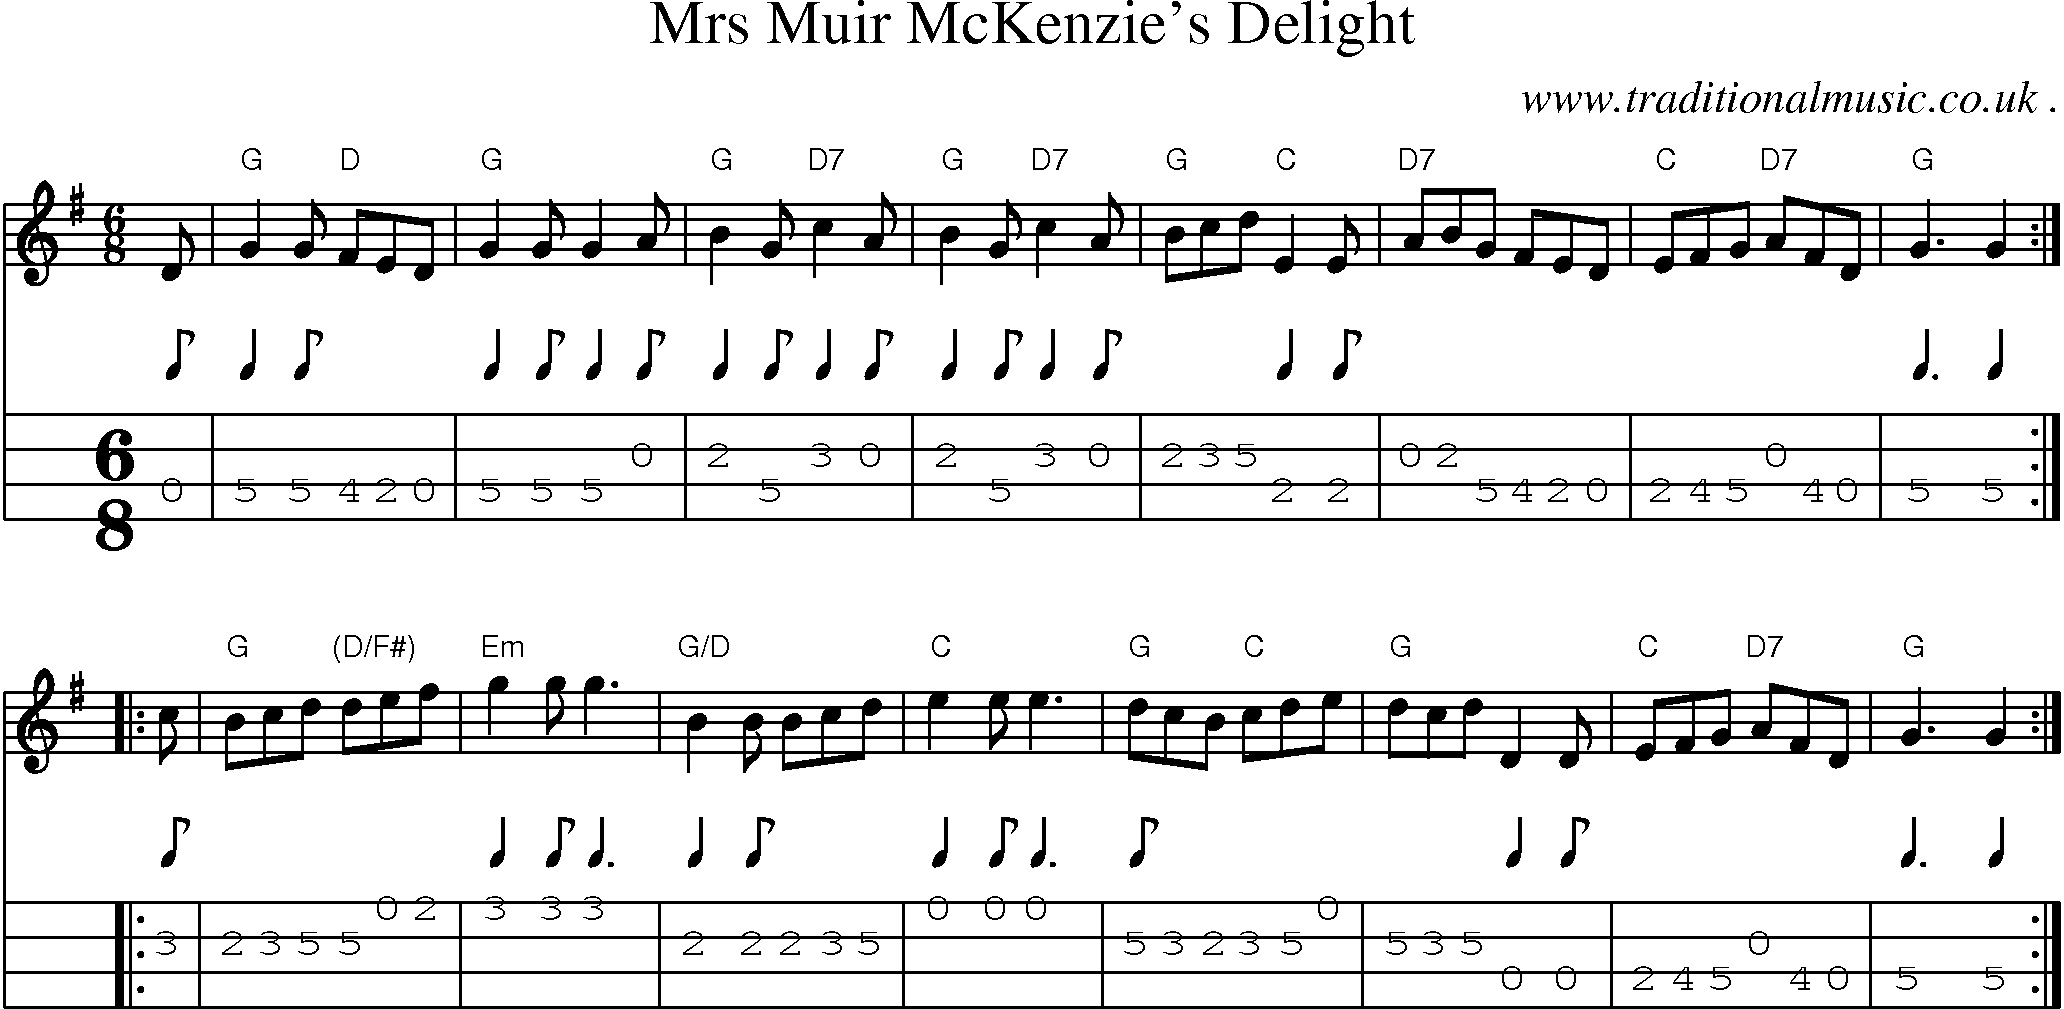 Sheet-music  score, Chords and Mandolin Tabs for Mrs Muir Mckenzies Delight